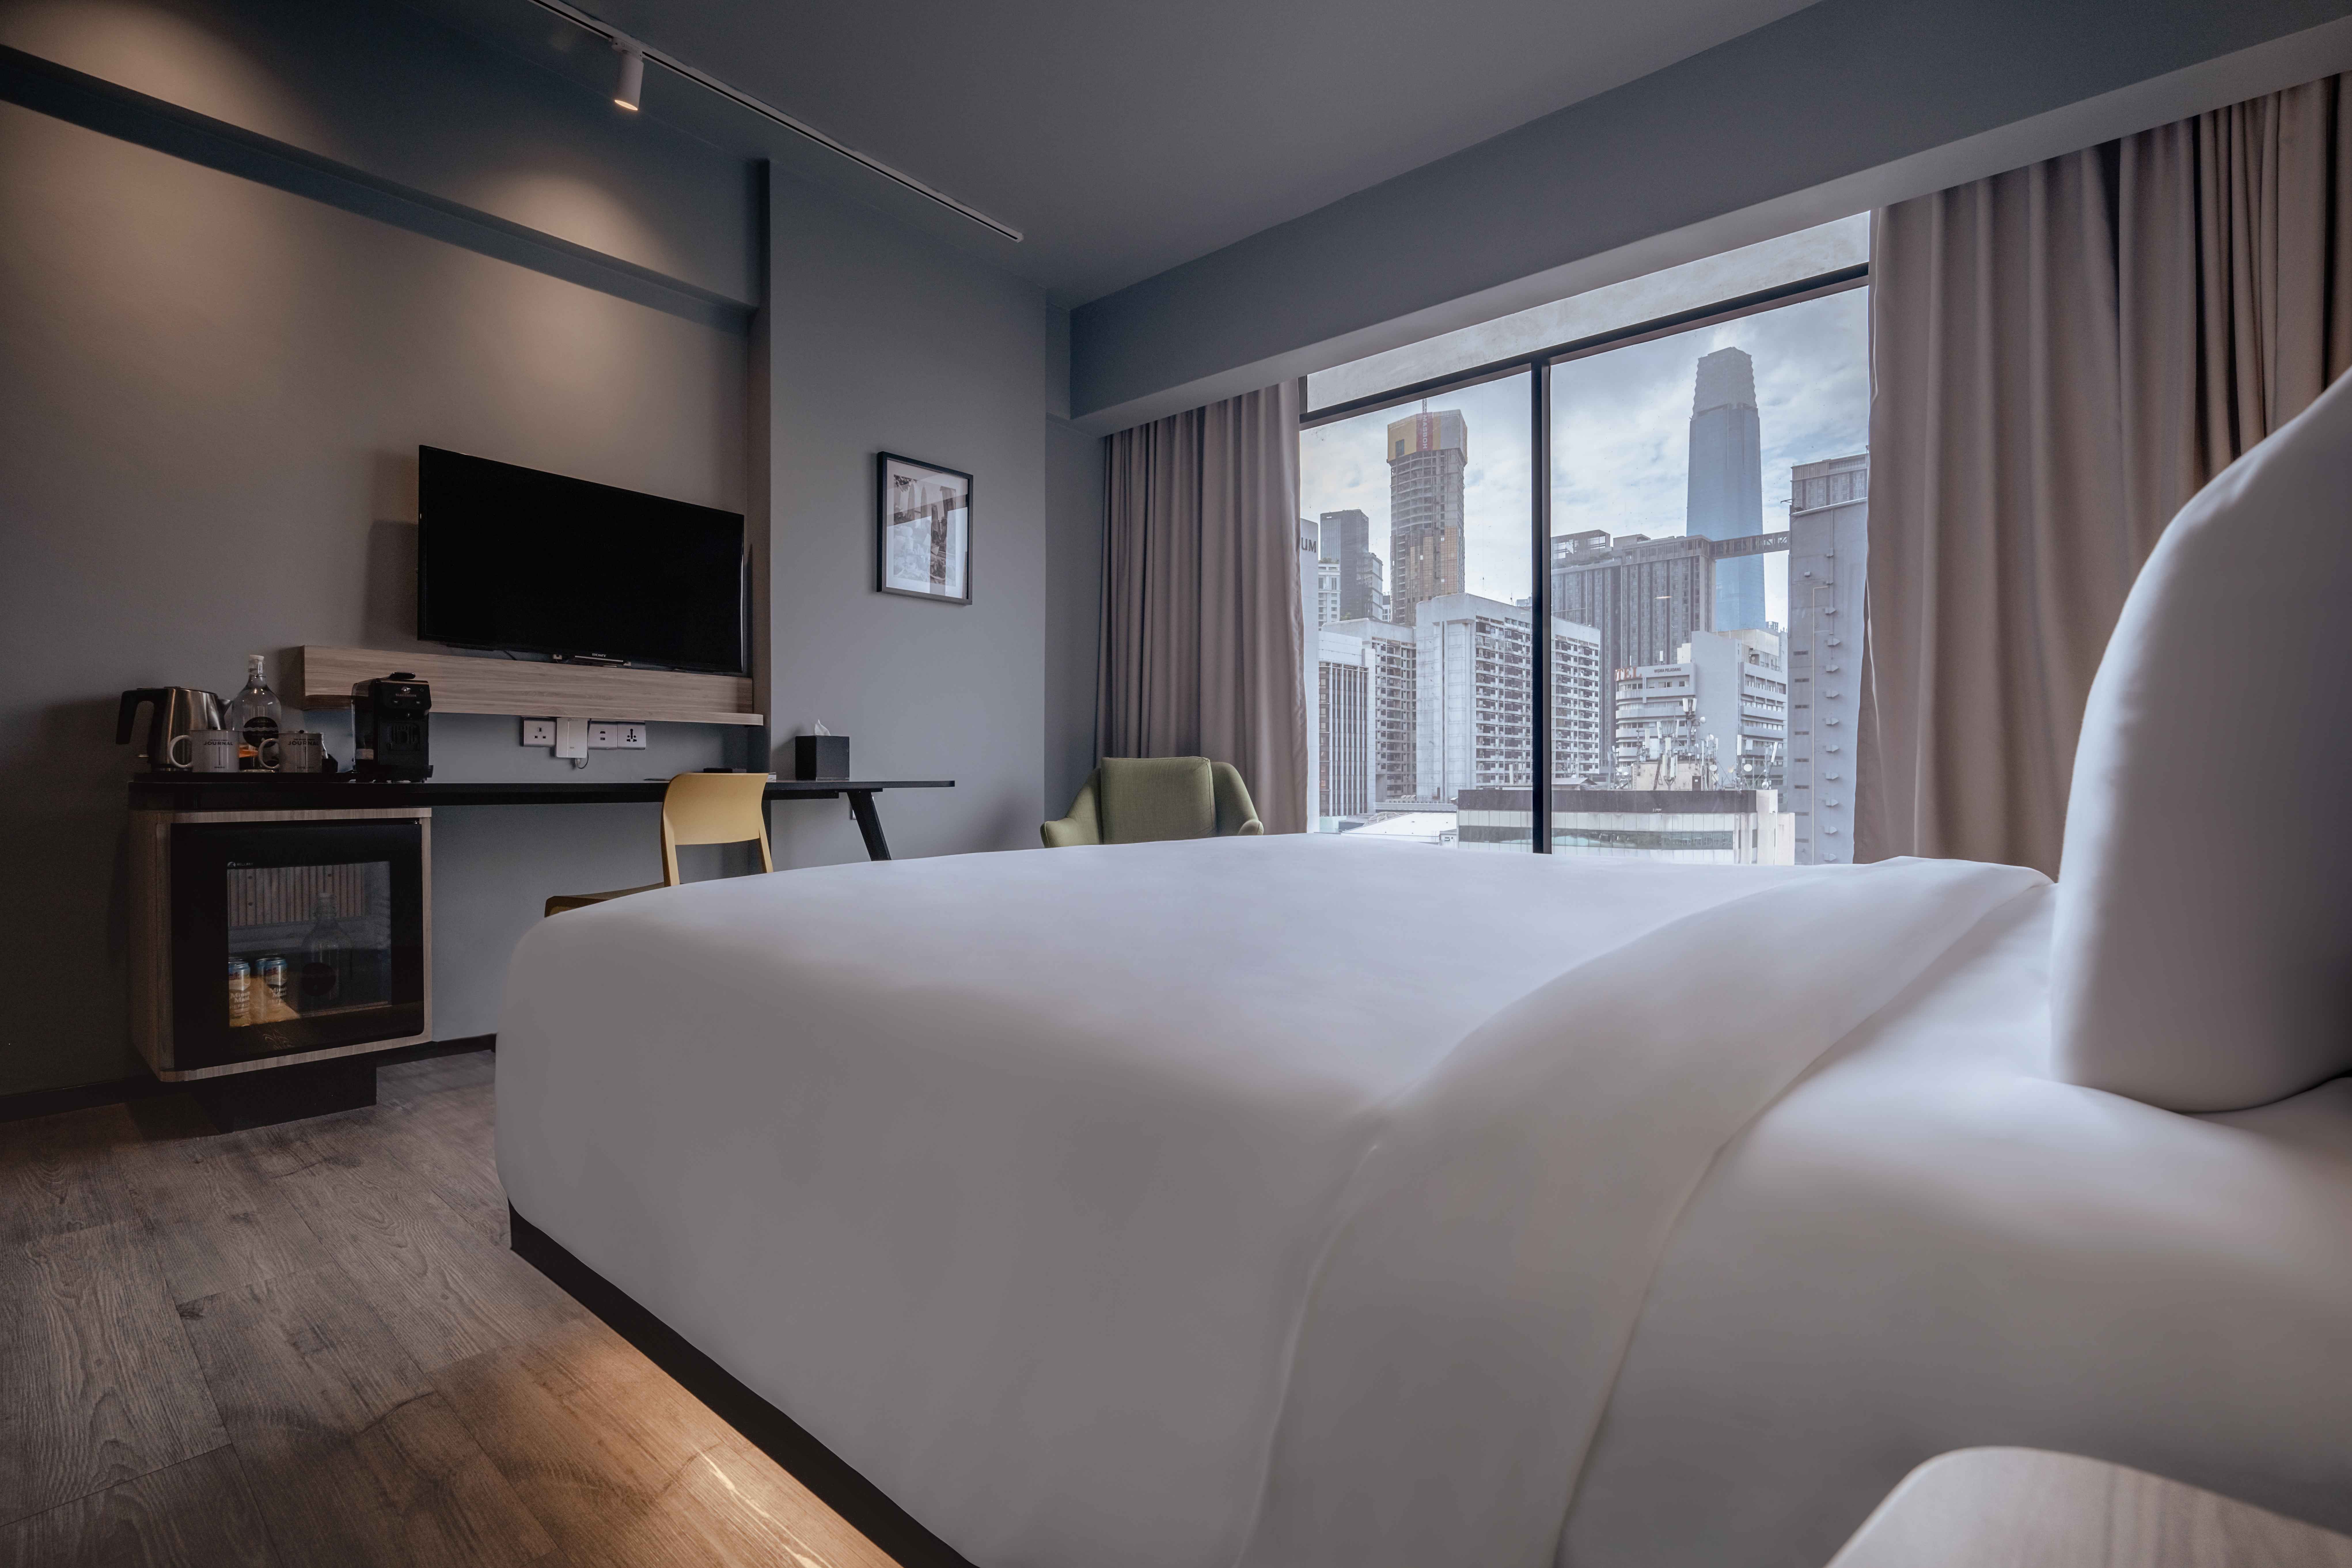 Deluxe Triple room at KL Journal Hotel with daytime city views